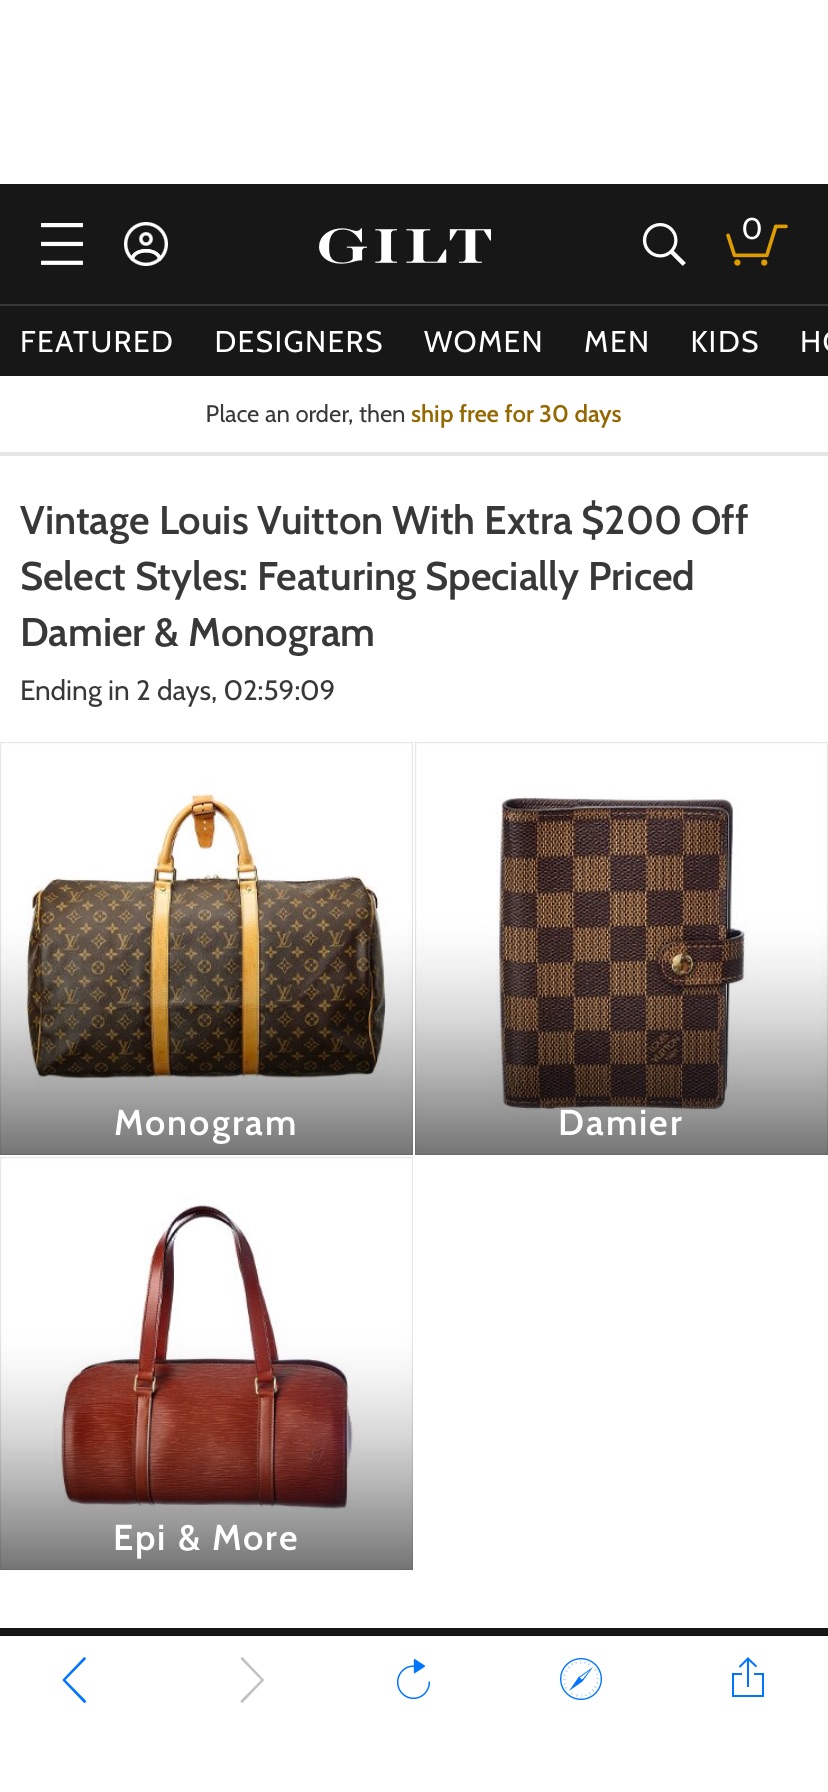 Vintage Louis Vuitton With Extra $200 Off Select Styles: Featuring Specially Priced Damier & Monogram / Gilt